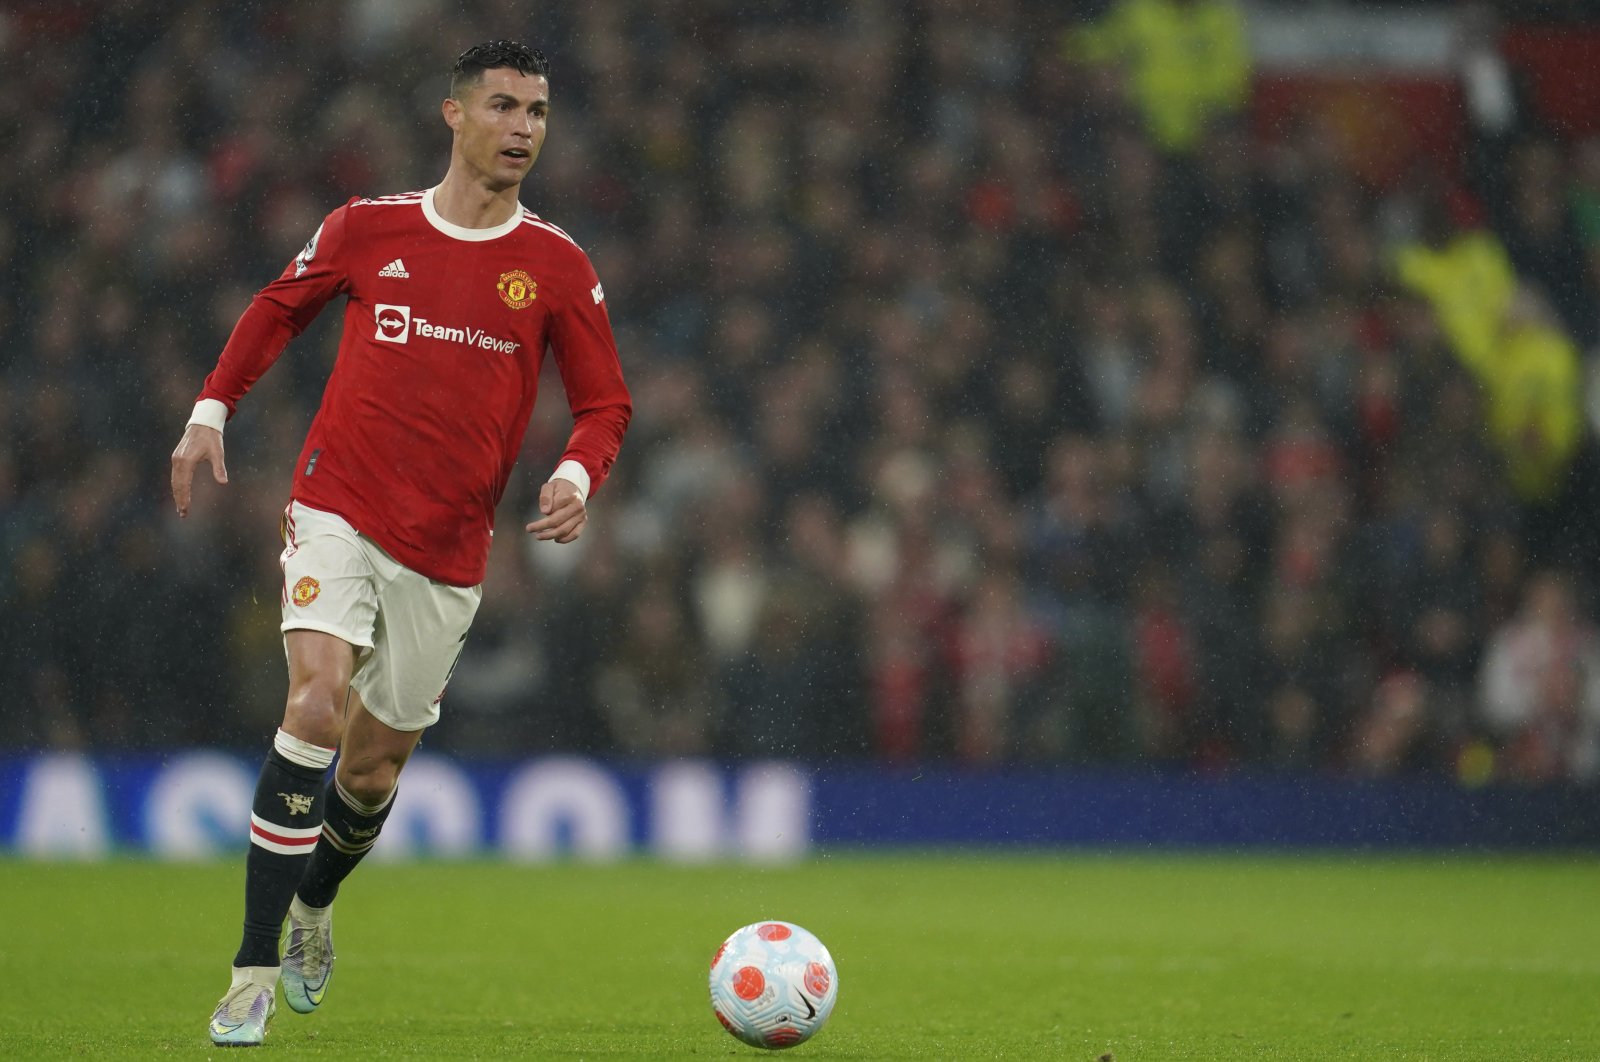 Man Utd&#039;s Cristiano Ronaldo in action during a Premier League match, Manchester, England, May 2, 2022. (AP Photo)